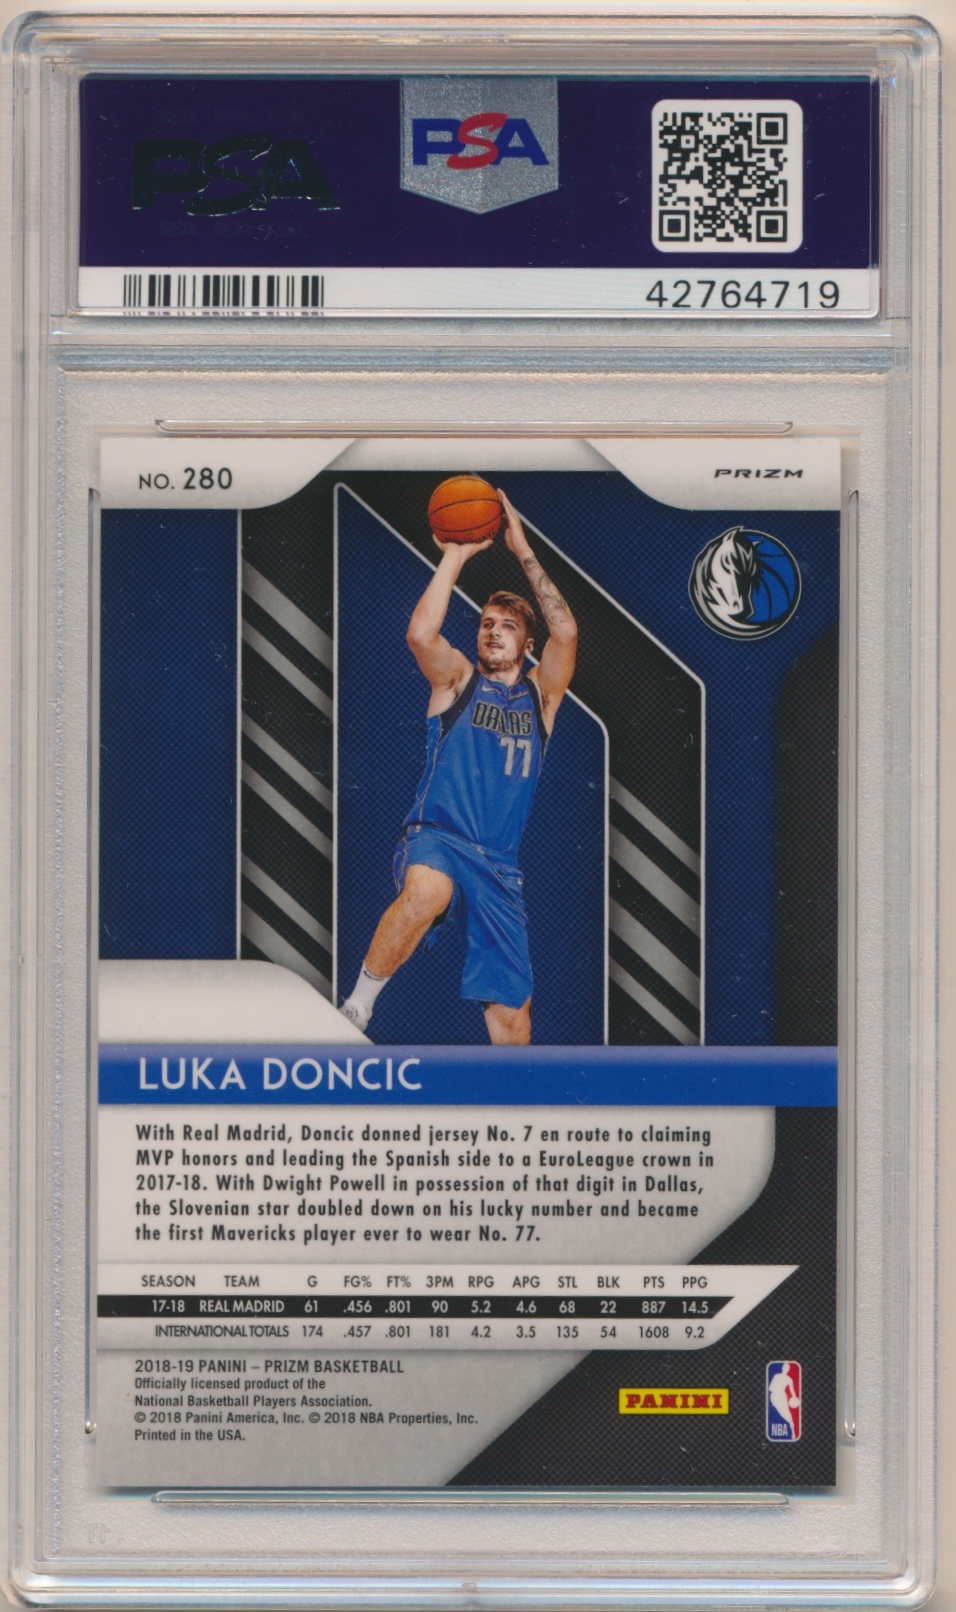 2018-19 Panini Prizm Prizms Red White and Blue #280 Luka Doncic Rookie PSA 10 Z27697 back image